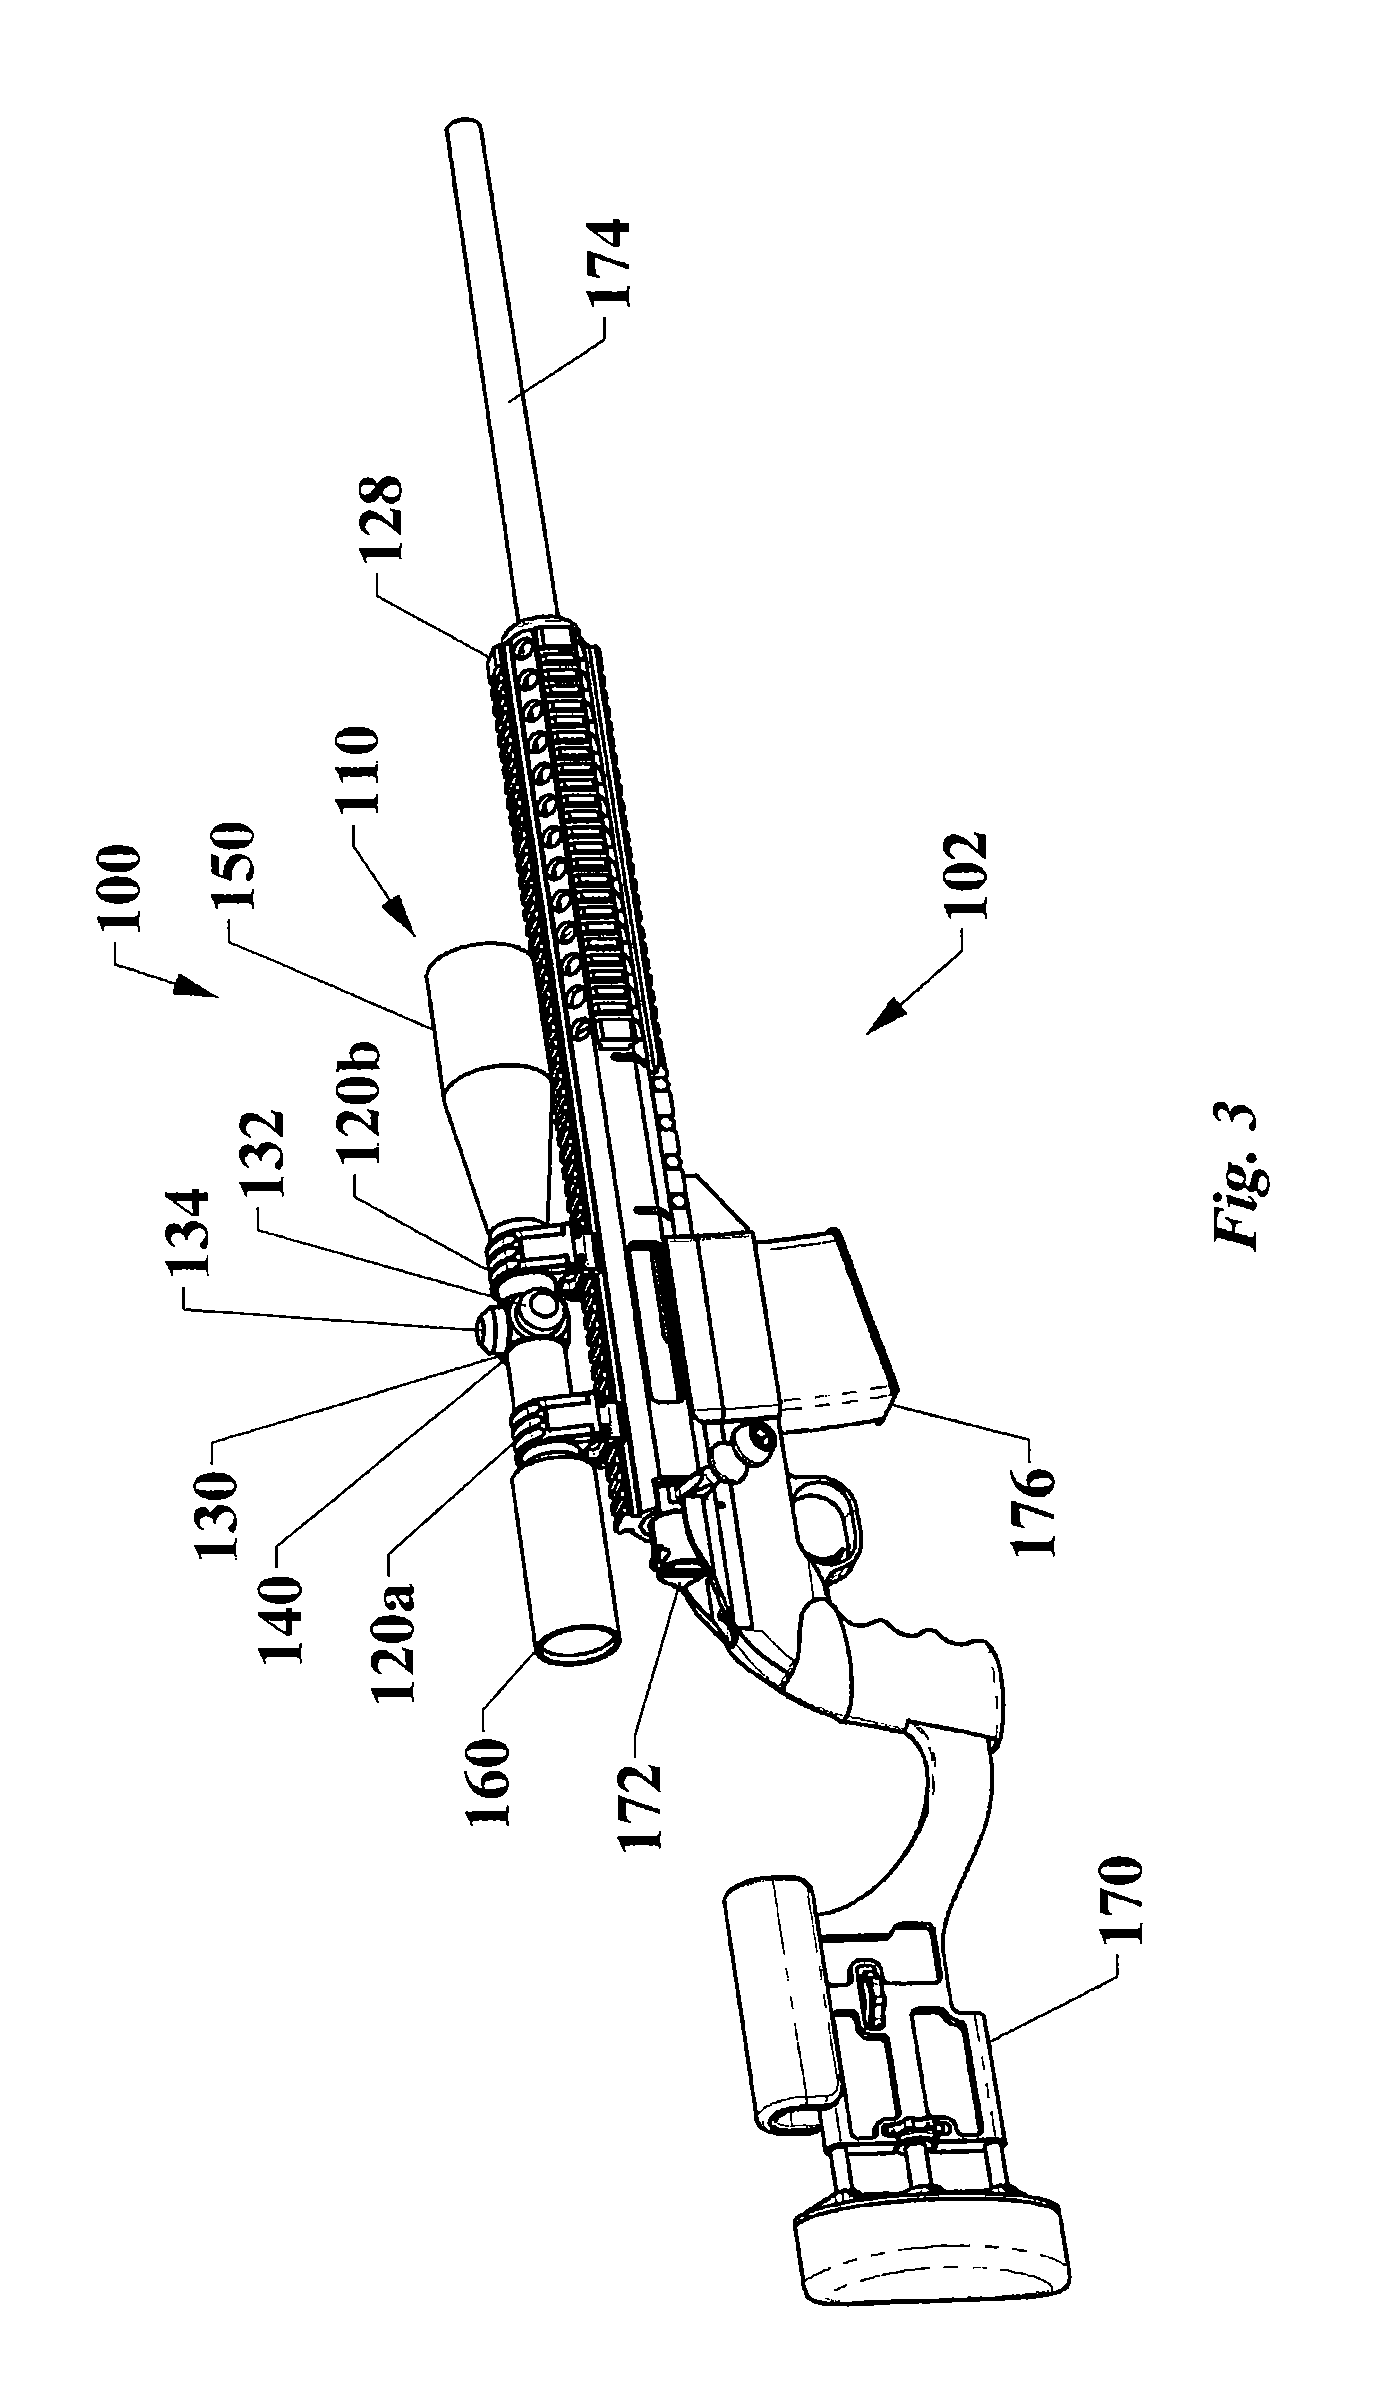 Mounting clamps for coupling scopes to mounting rails of firearms